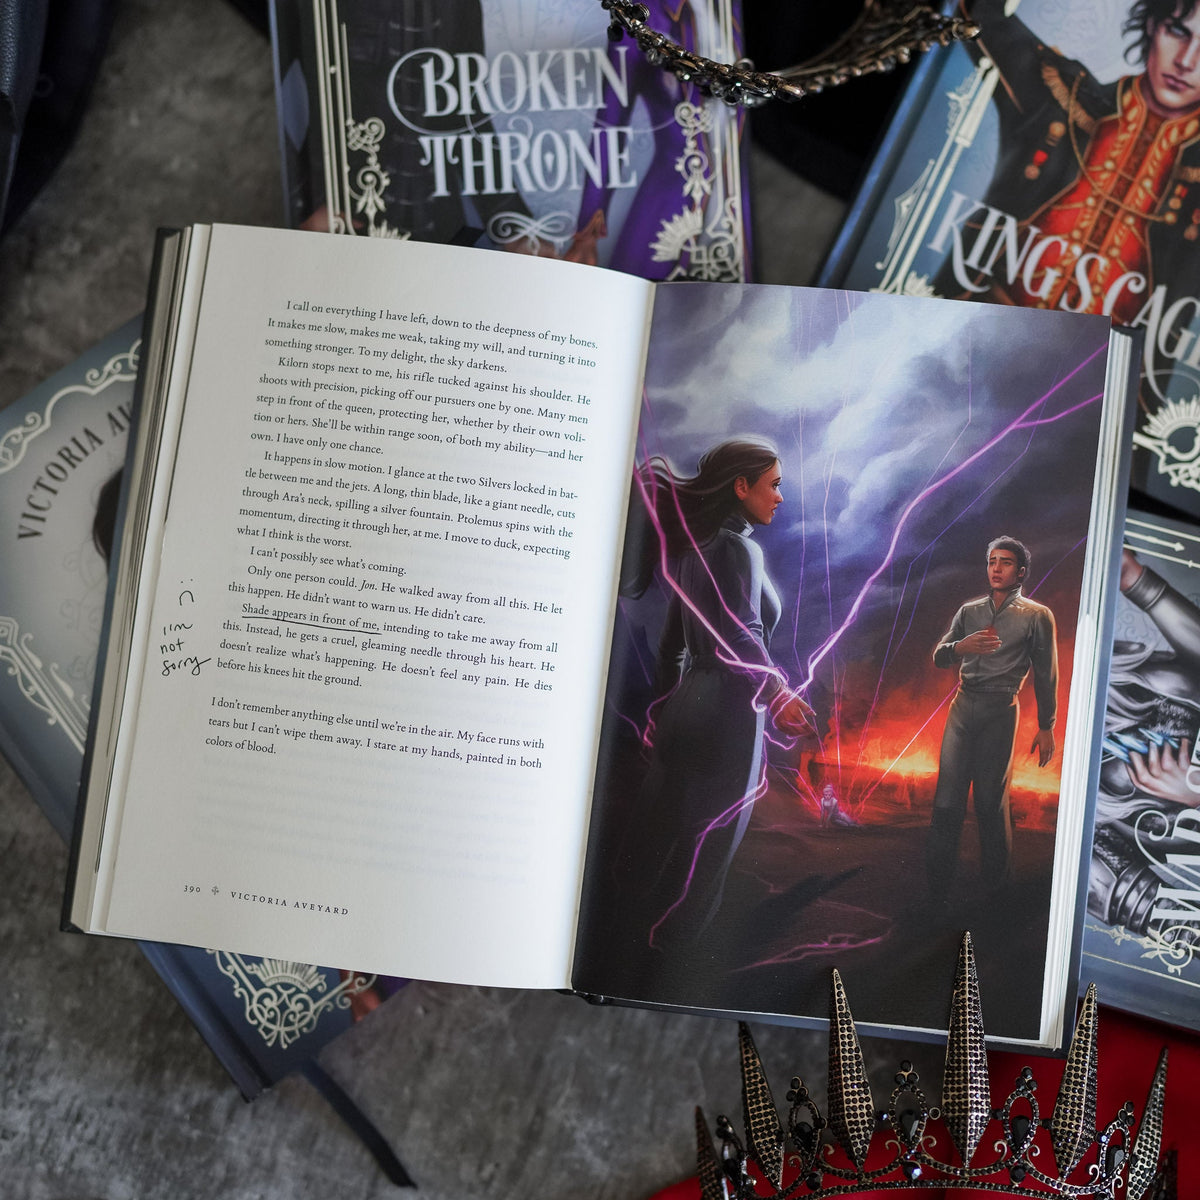 Interior artwork within the special edition books